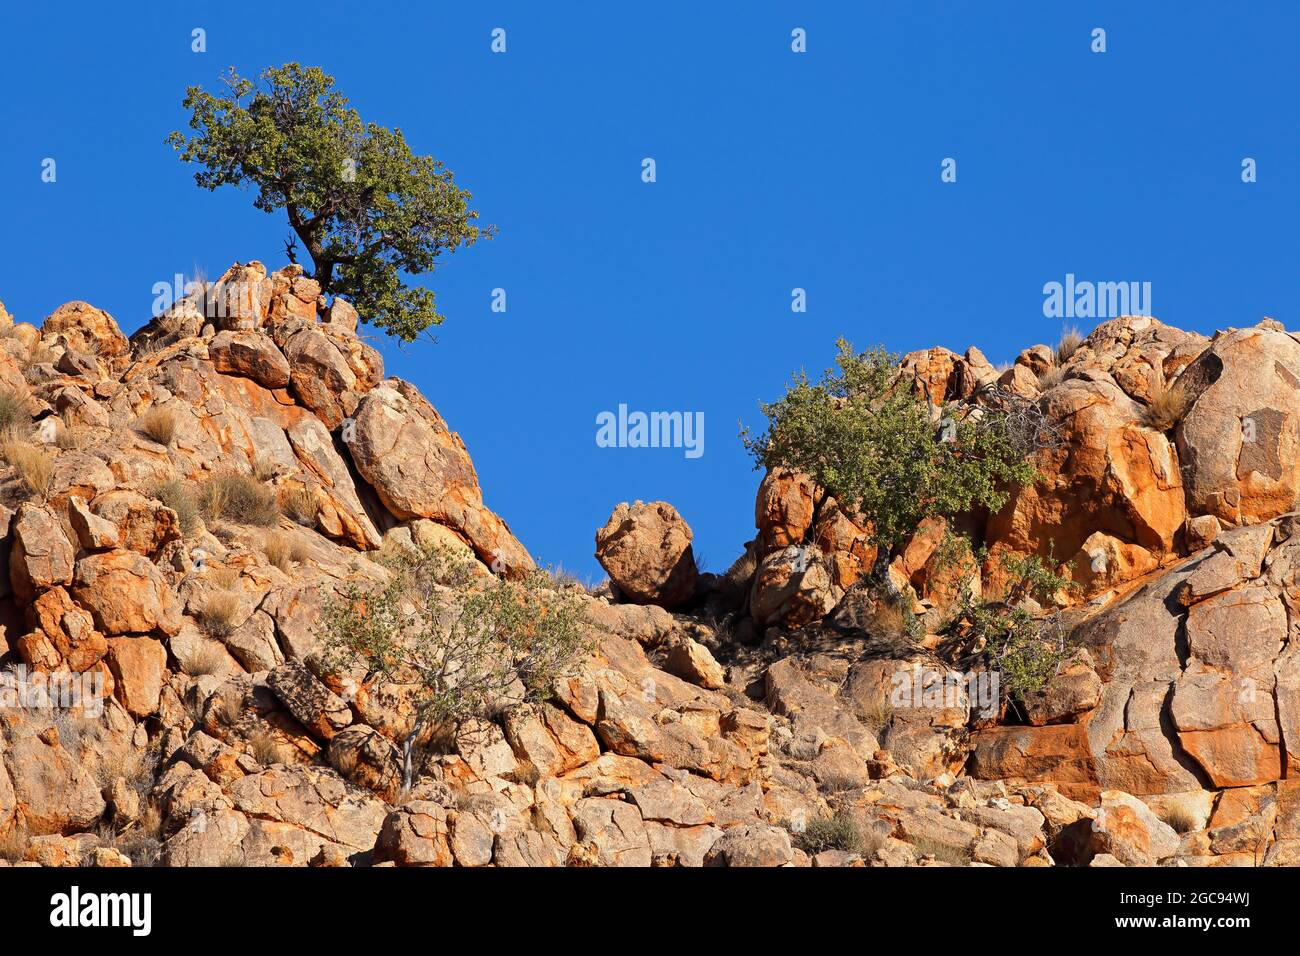 Landscape with rugged rock formation and tree, southern Namibia Stock Photo